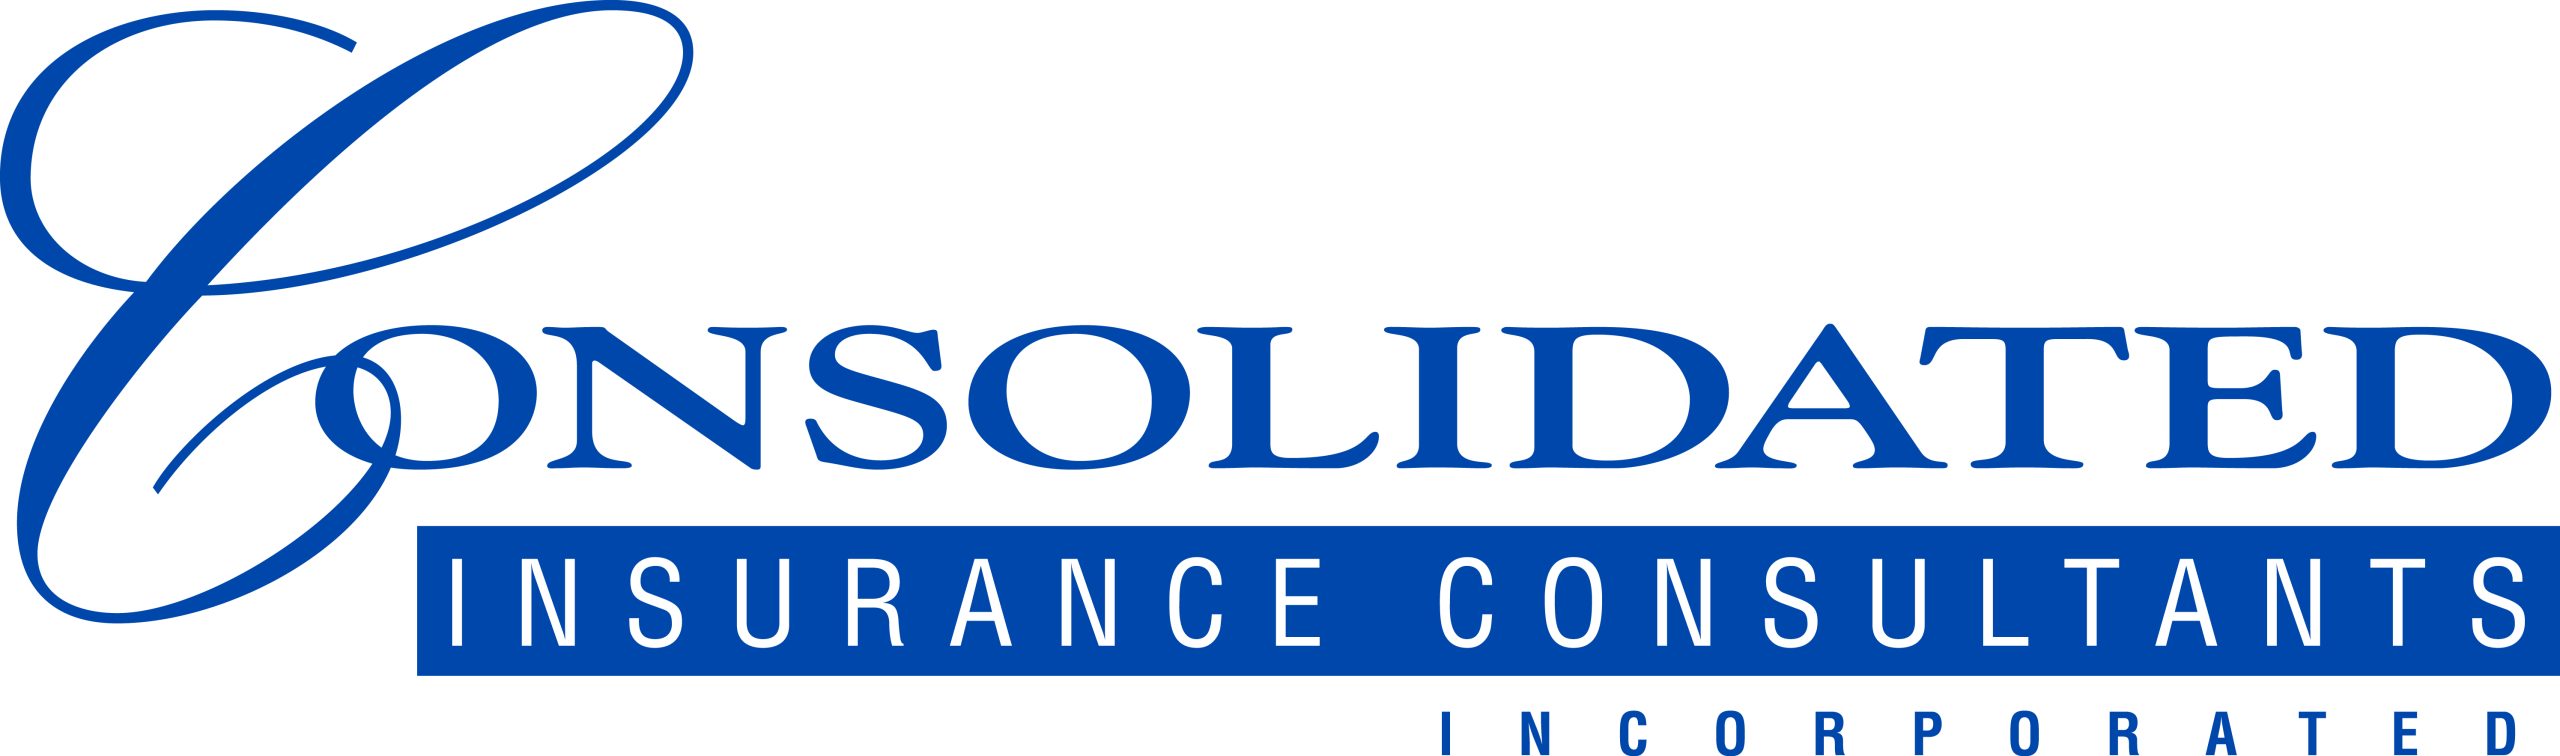 Consolidated Insurance Consultants logo